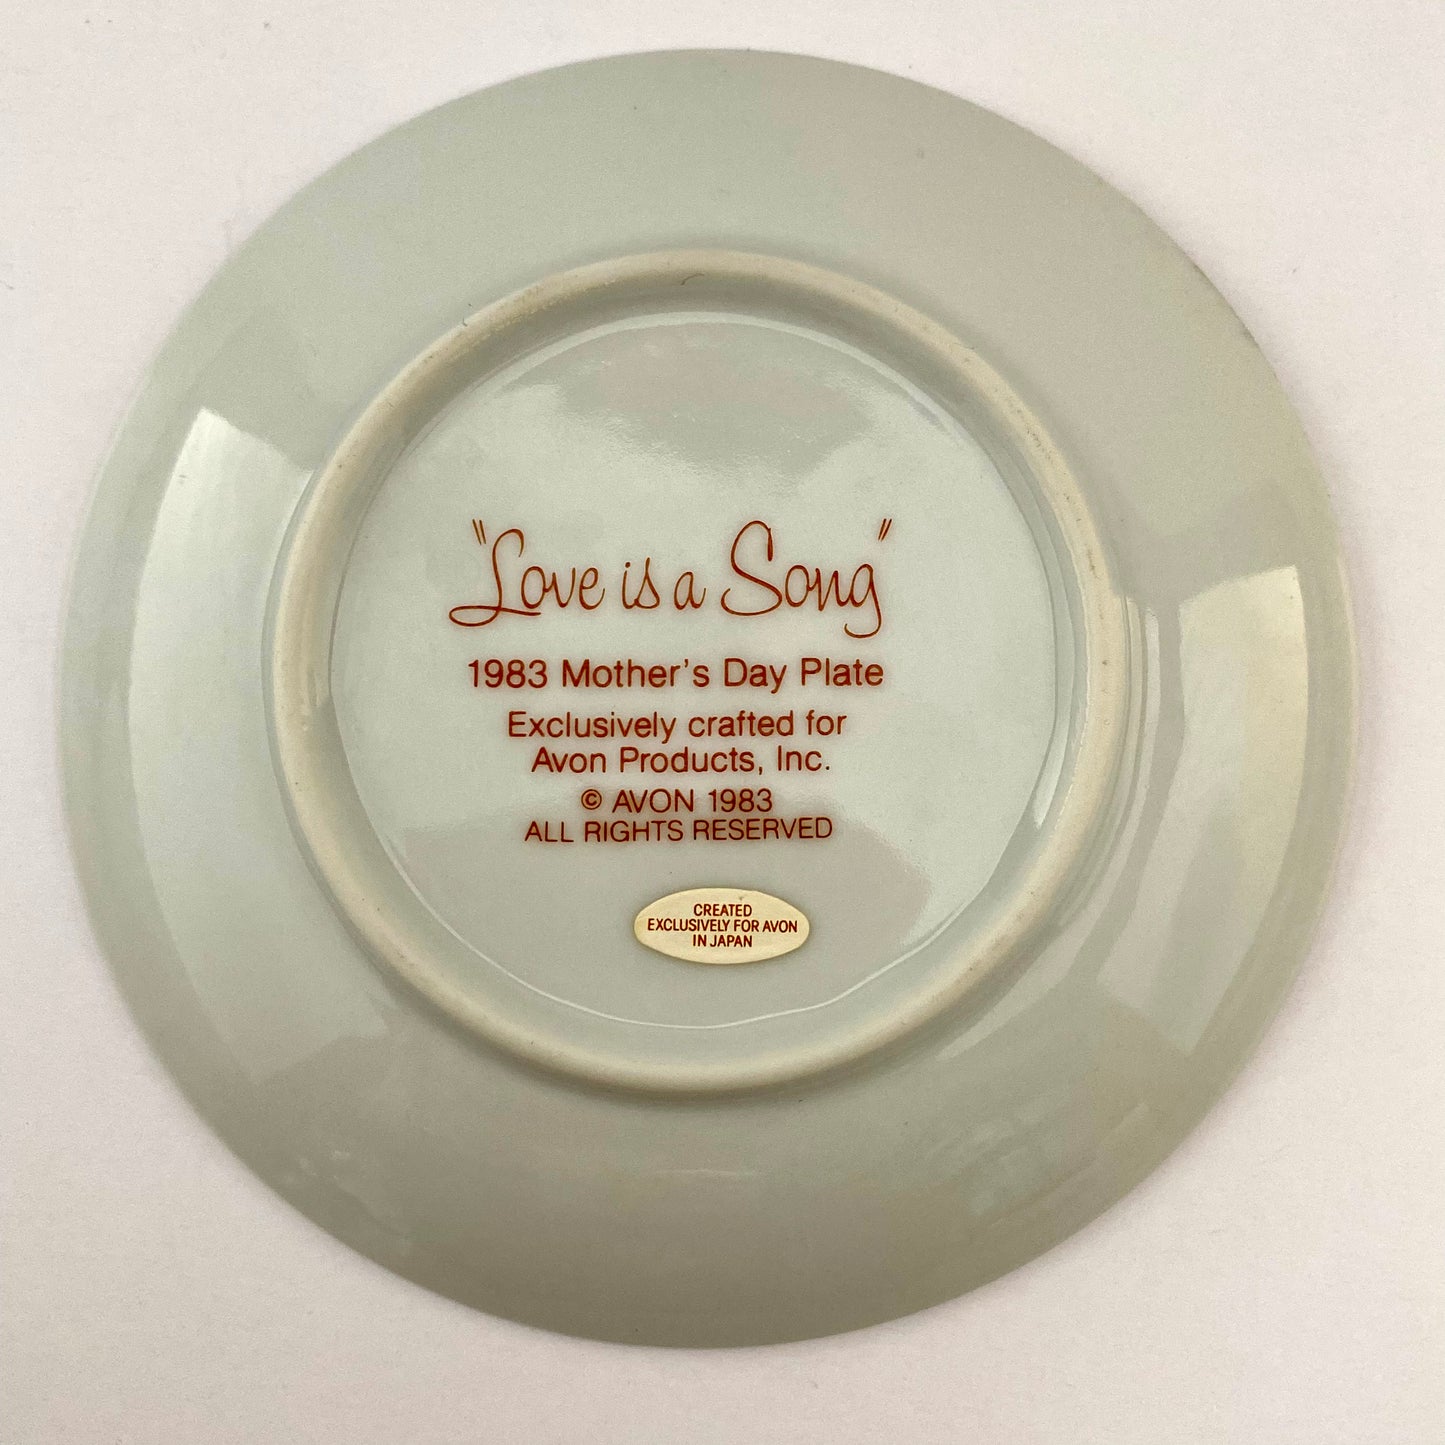 1983 Avon Mother's Day "Love is a Song" Plate